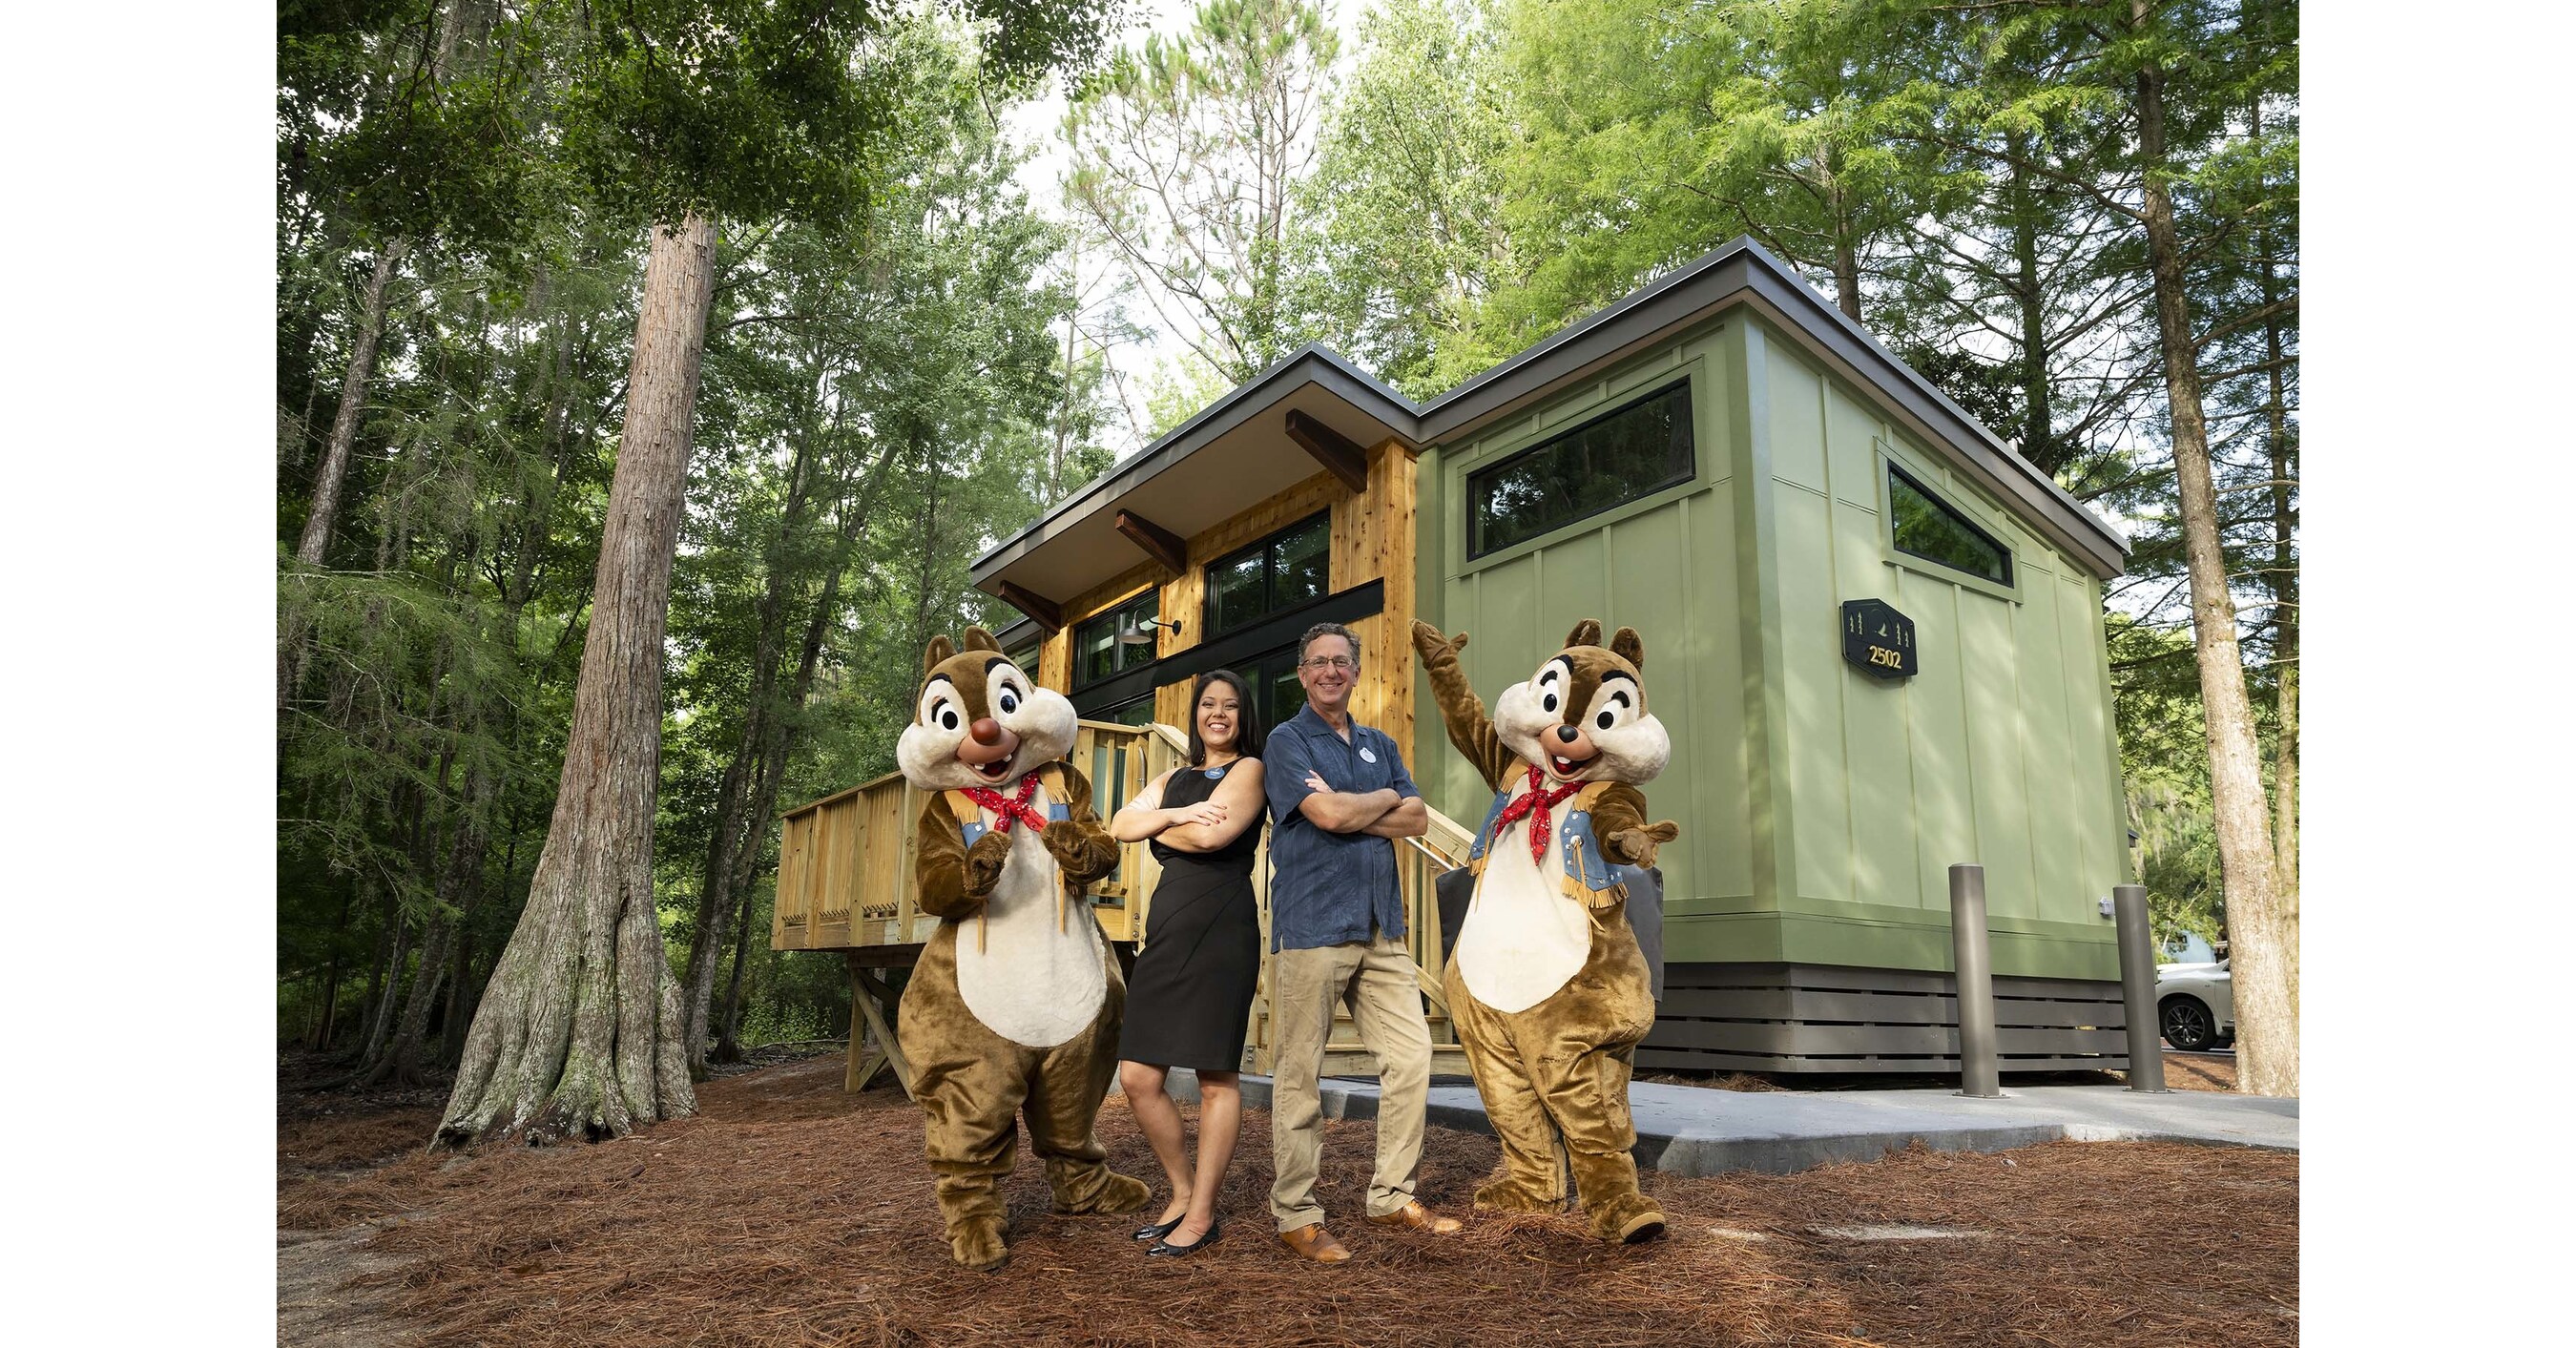 Disney Vacation Club welcomes guests to the first new cabins at Disney’s Fort Wilderness Resort